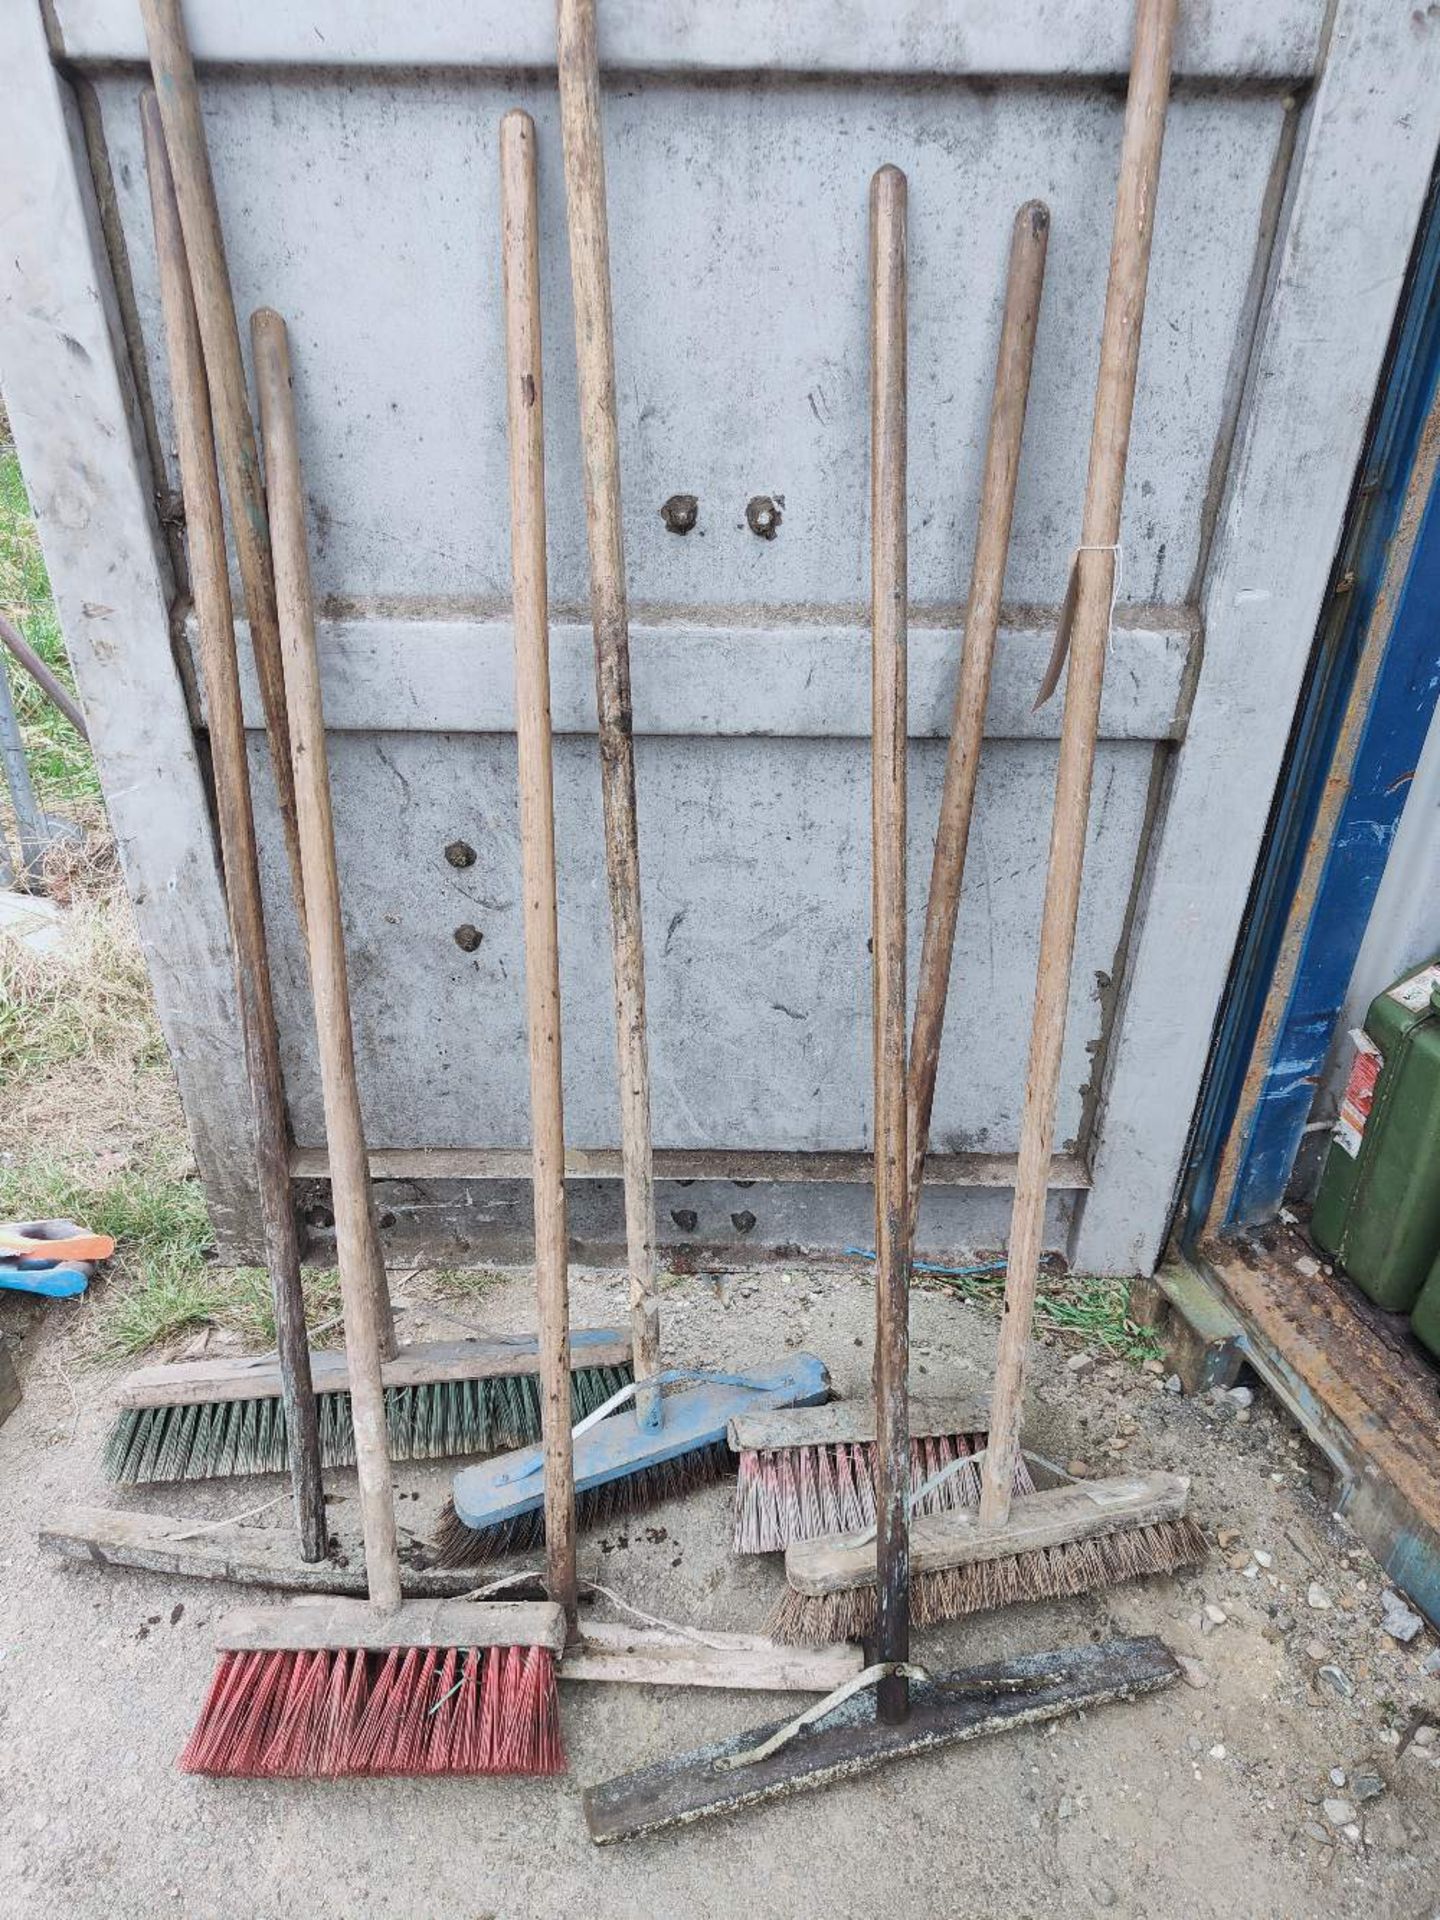 (5) Assorted brooms and (3) tamping tools